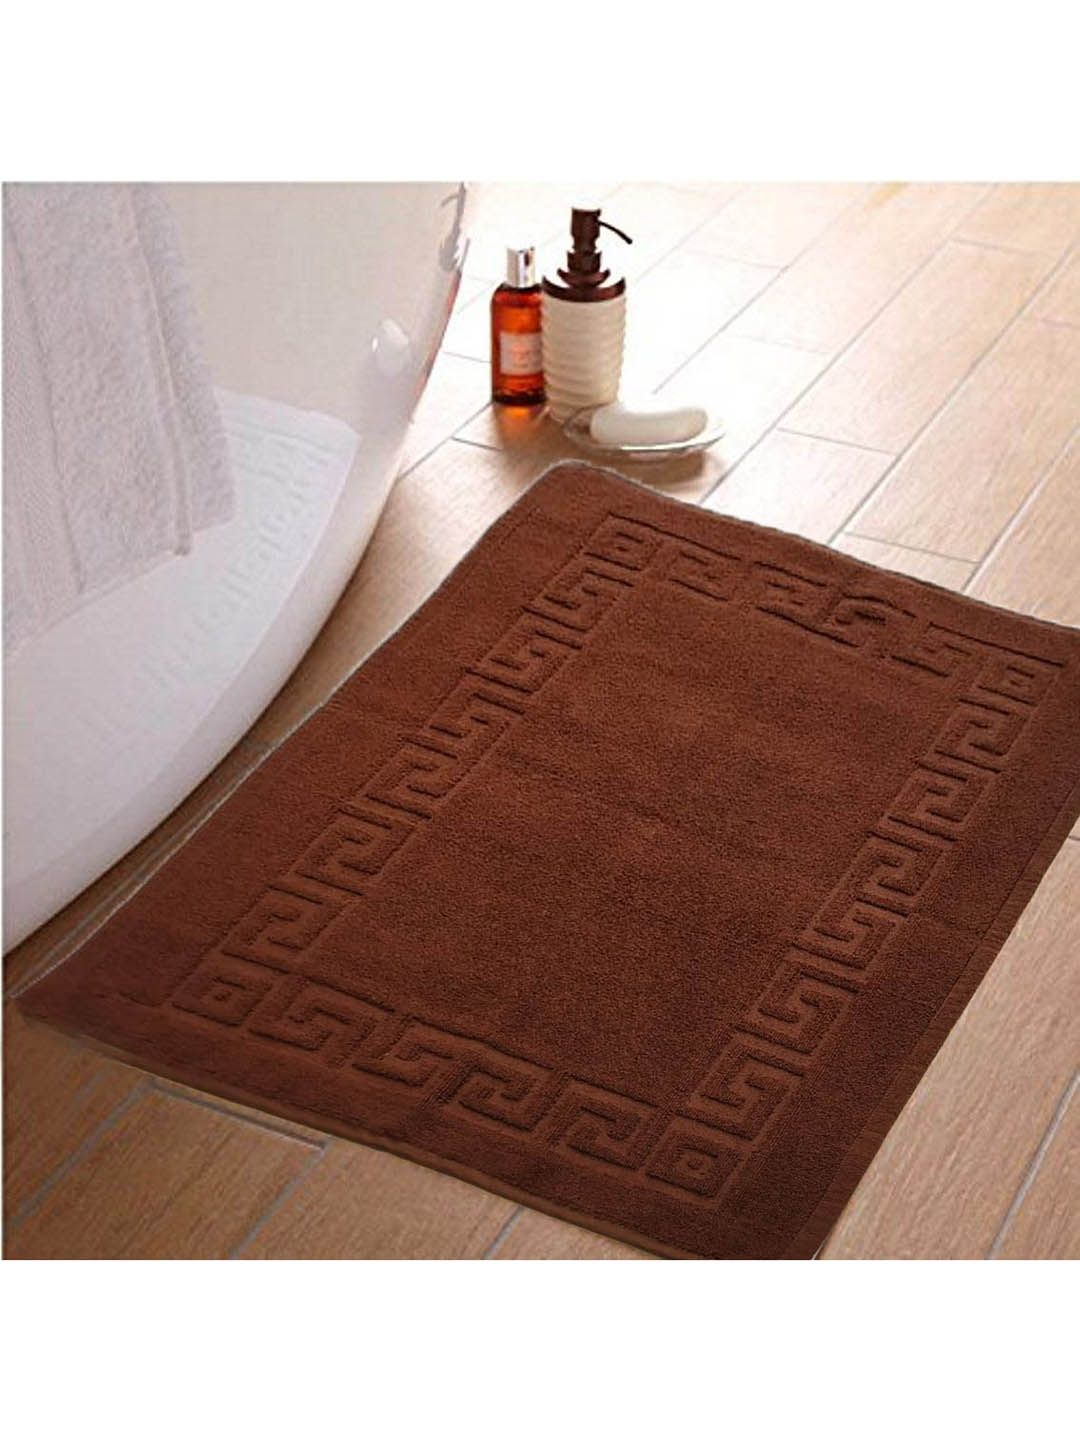 Lushomes Brown Super Soft Pure Cotton 100GSM Bath Rug Price in India